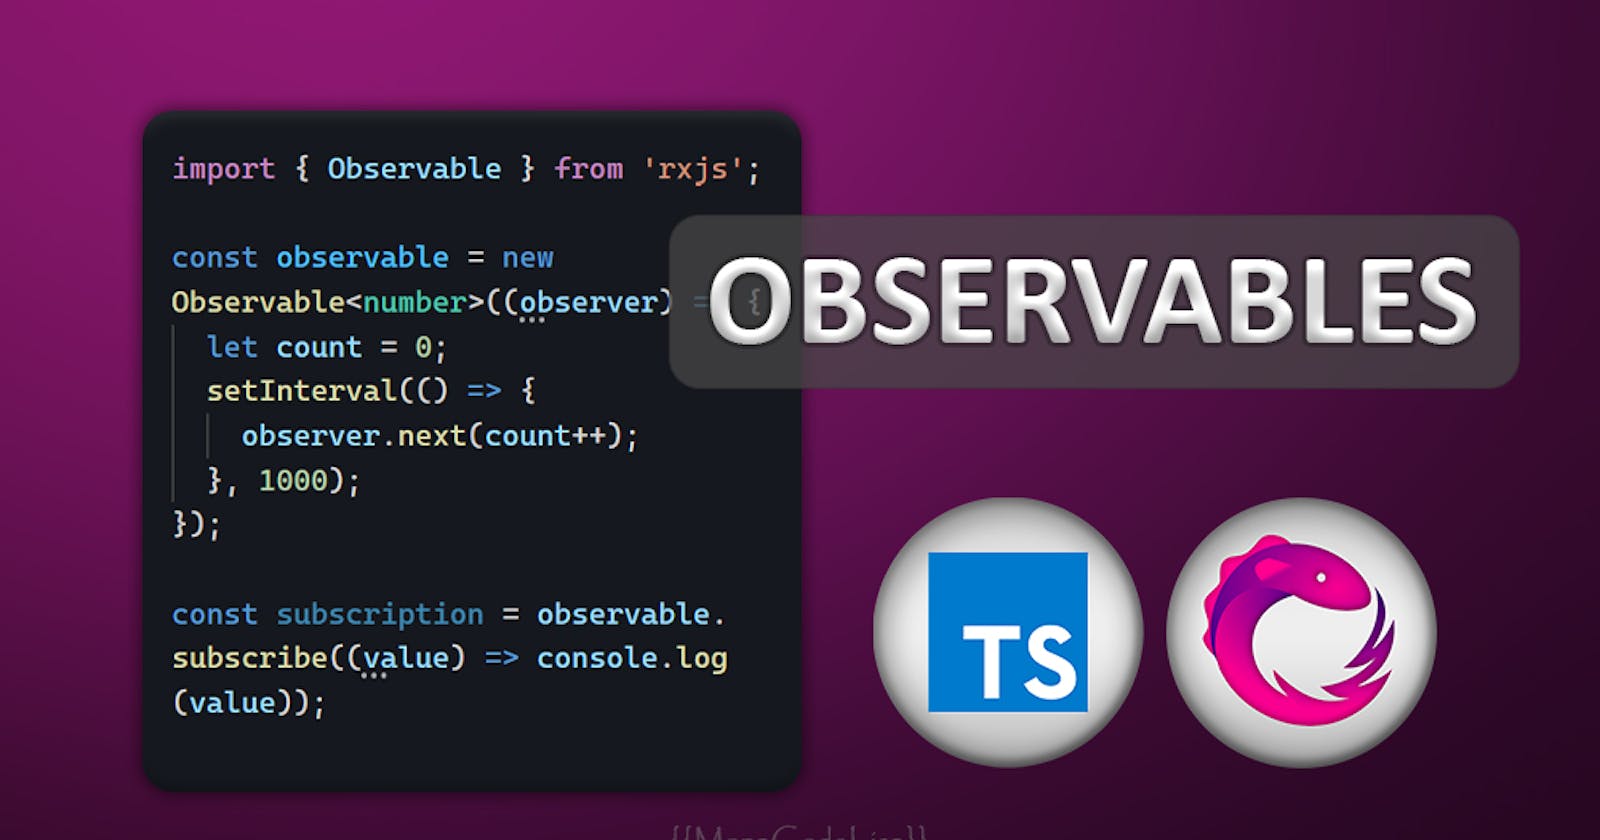 What is an 'Observable' in Reactive Programming / RxJS - Simple & Code Example